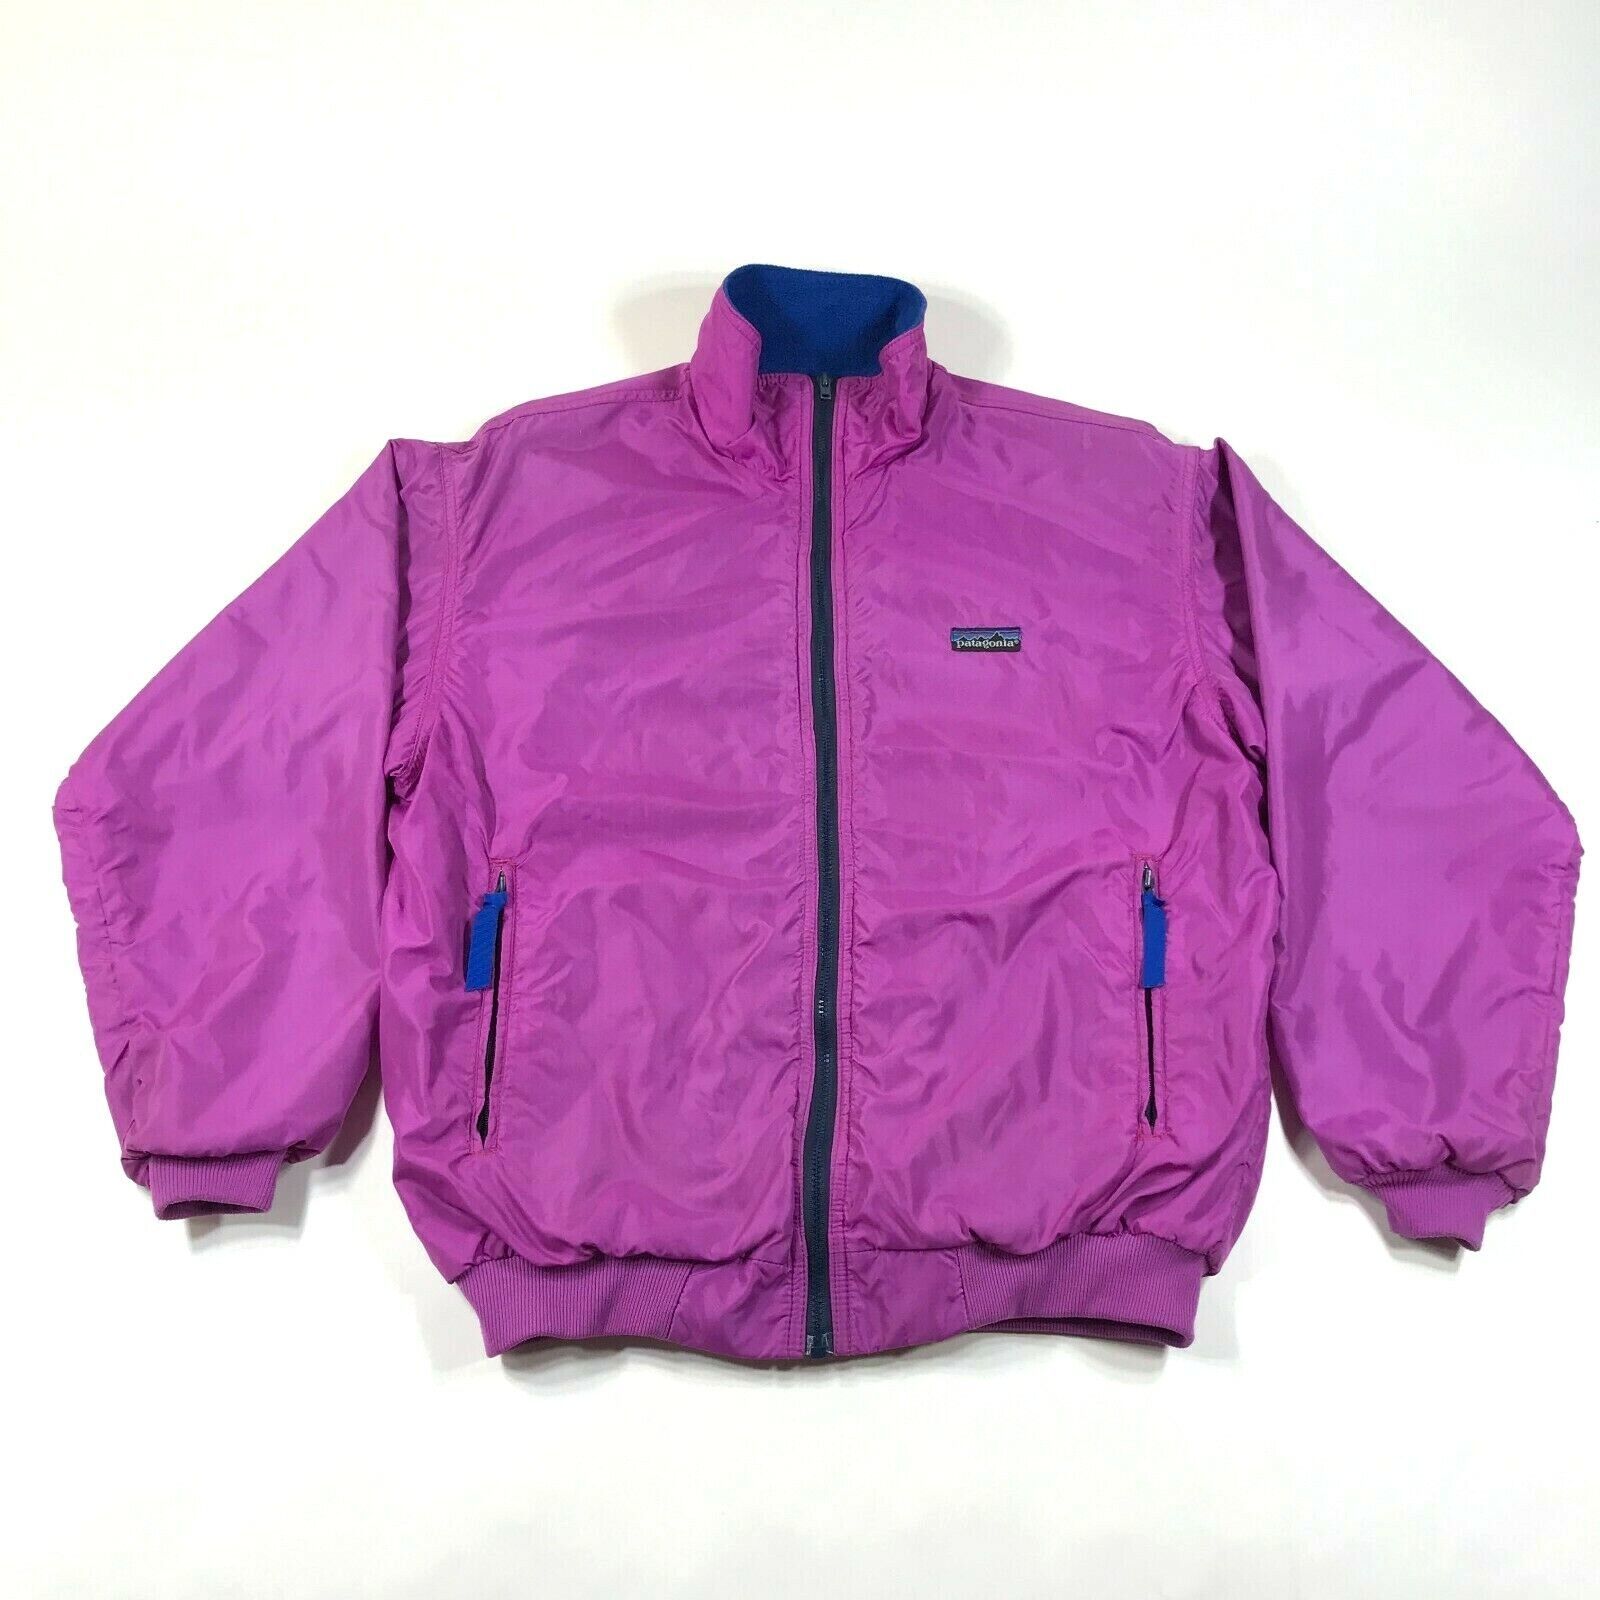 Primary image for Vintage 80s Patagonia Nylon Lightweight Jacket Womens 14 Purple Fleece Lined